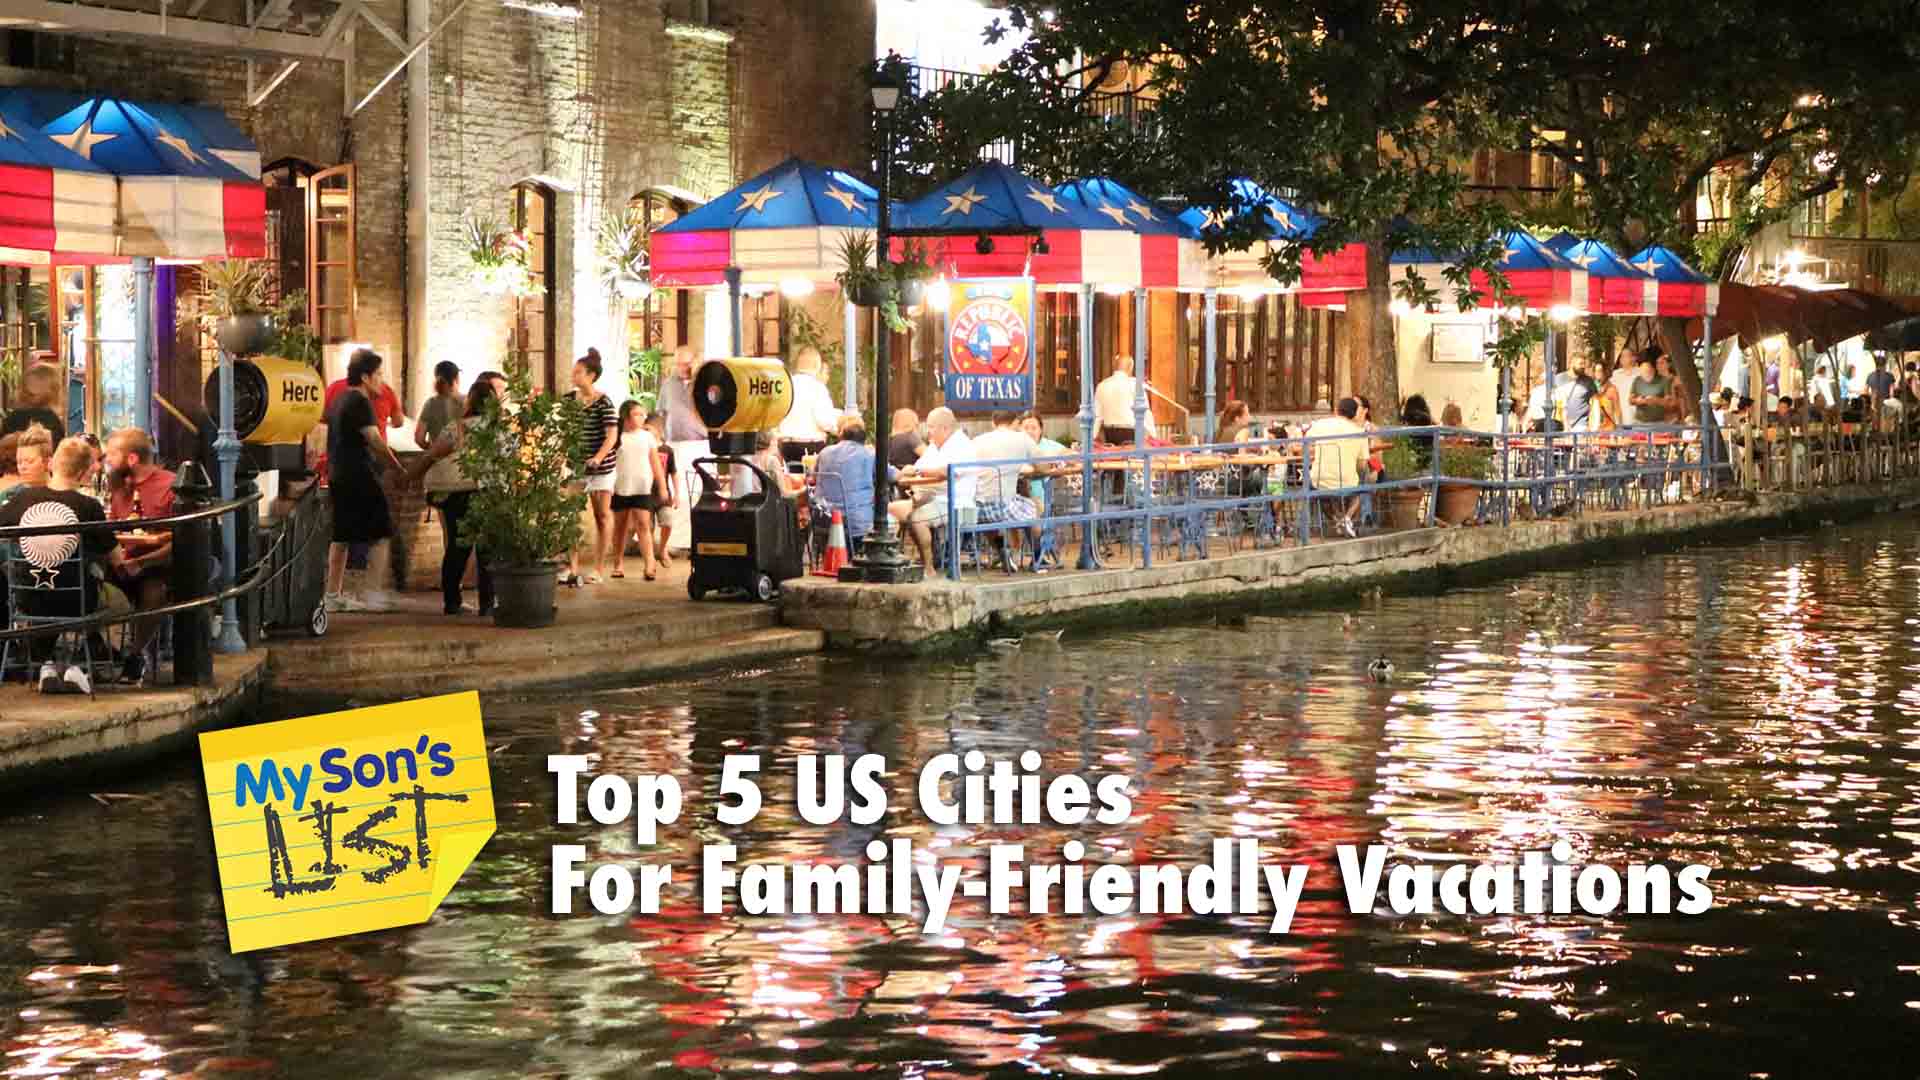 Top 5 US Cities For A Family-Friendly Vacation